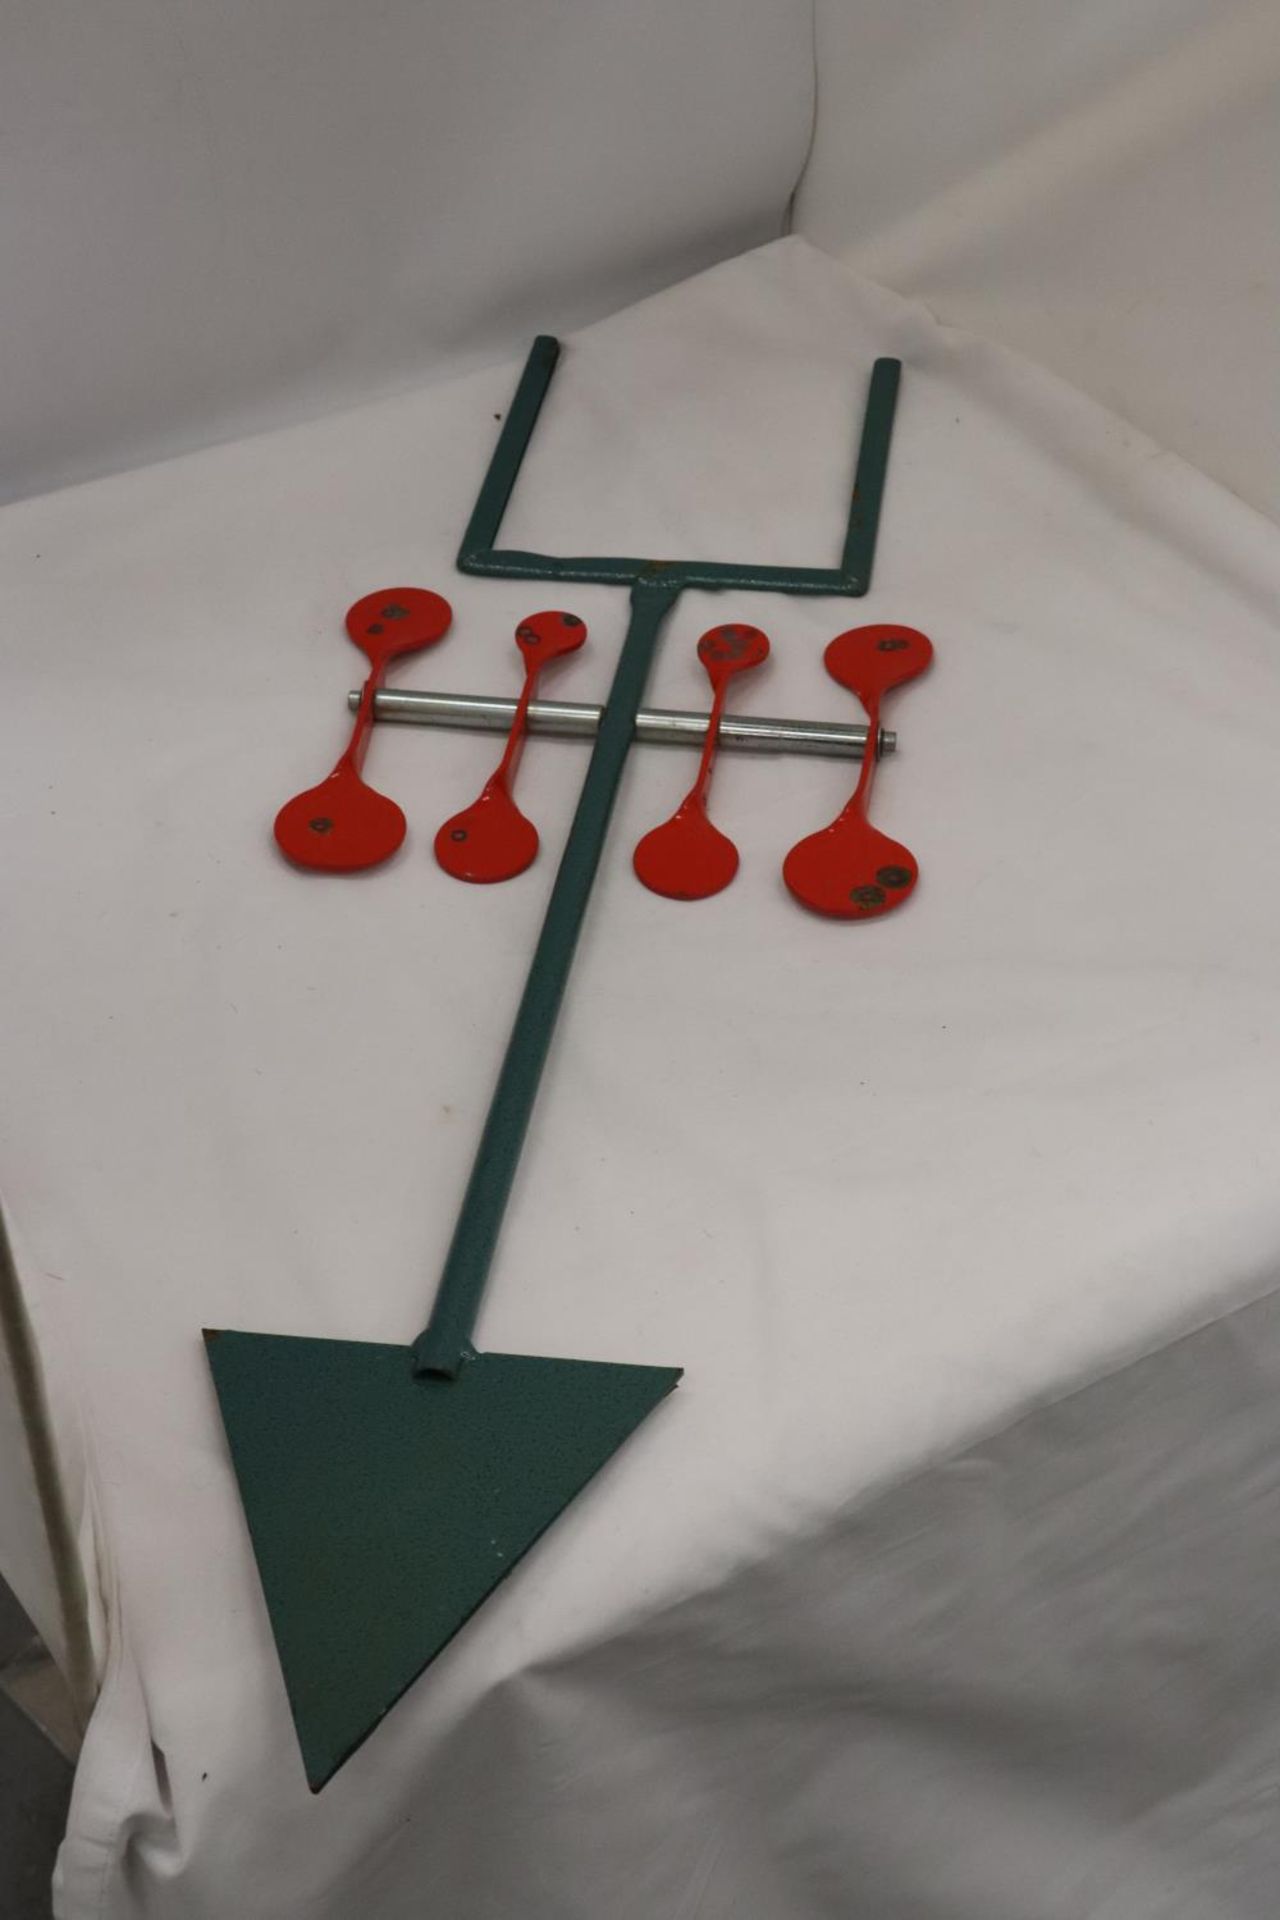 A METAL SPINNING TARGET FOR RIFLE PRACTICE - Image 2 of 4